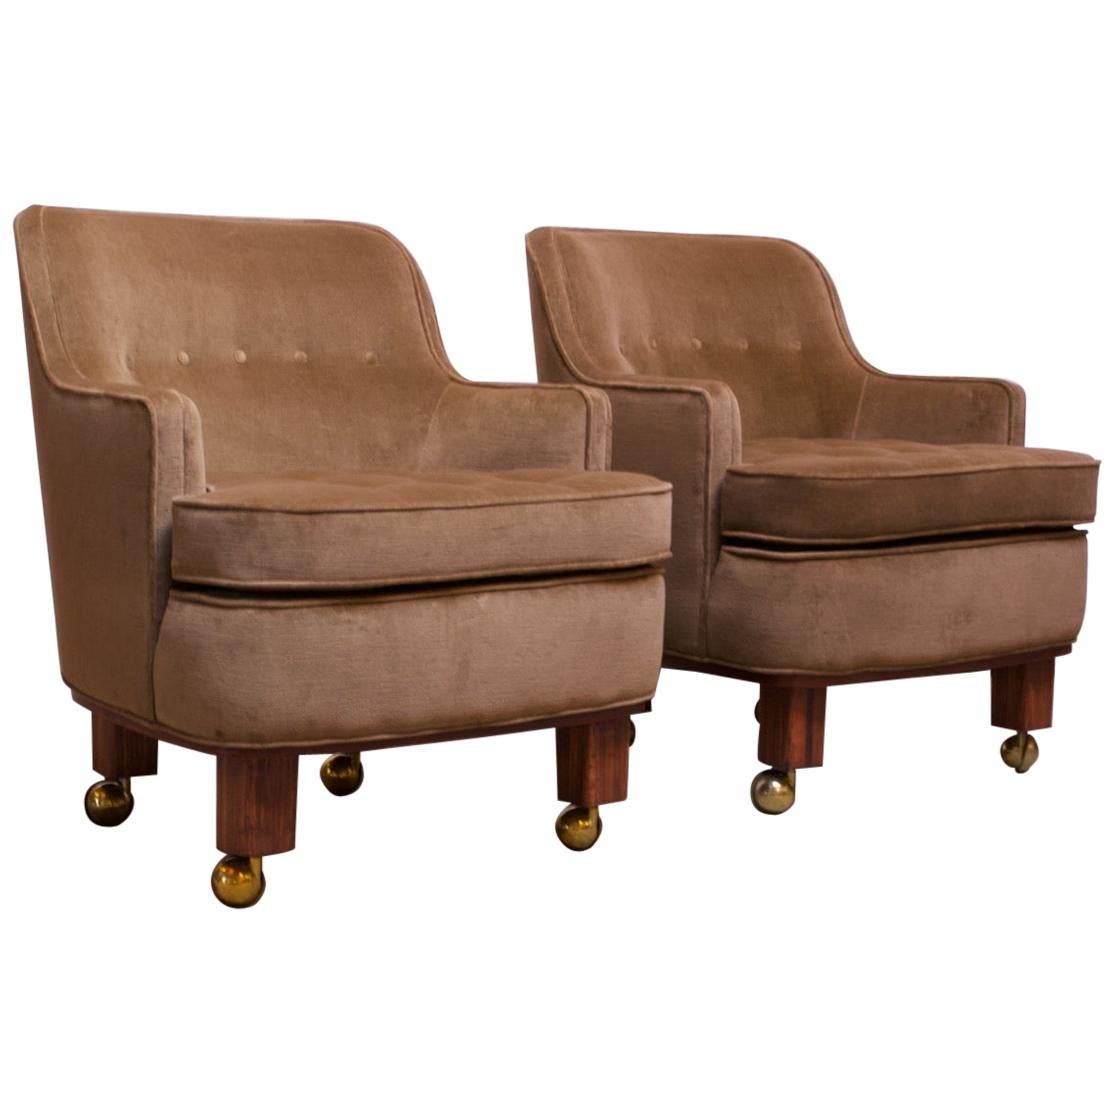 Pair of Lounge Chairs in Mahogany and Velvet by Edward Wormley for Dunbar For Sale